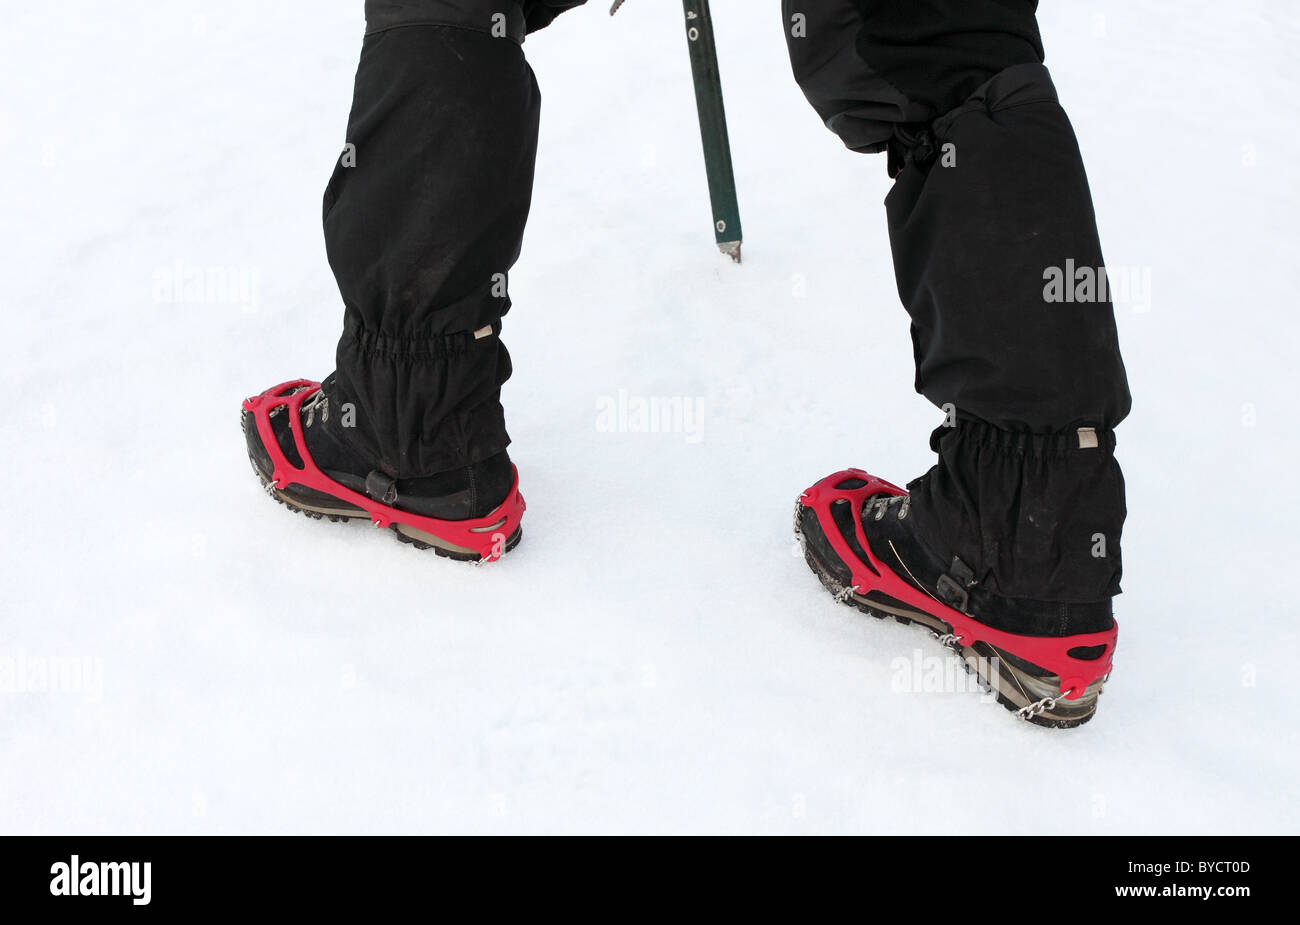 Close up View of a Pair of Kathoola Microspike Crampons in Use on Snow UK Stock Photo